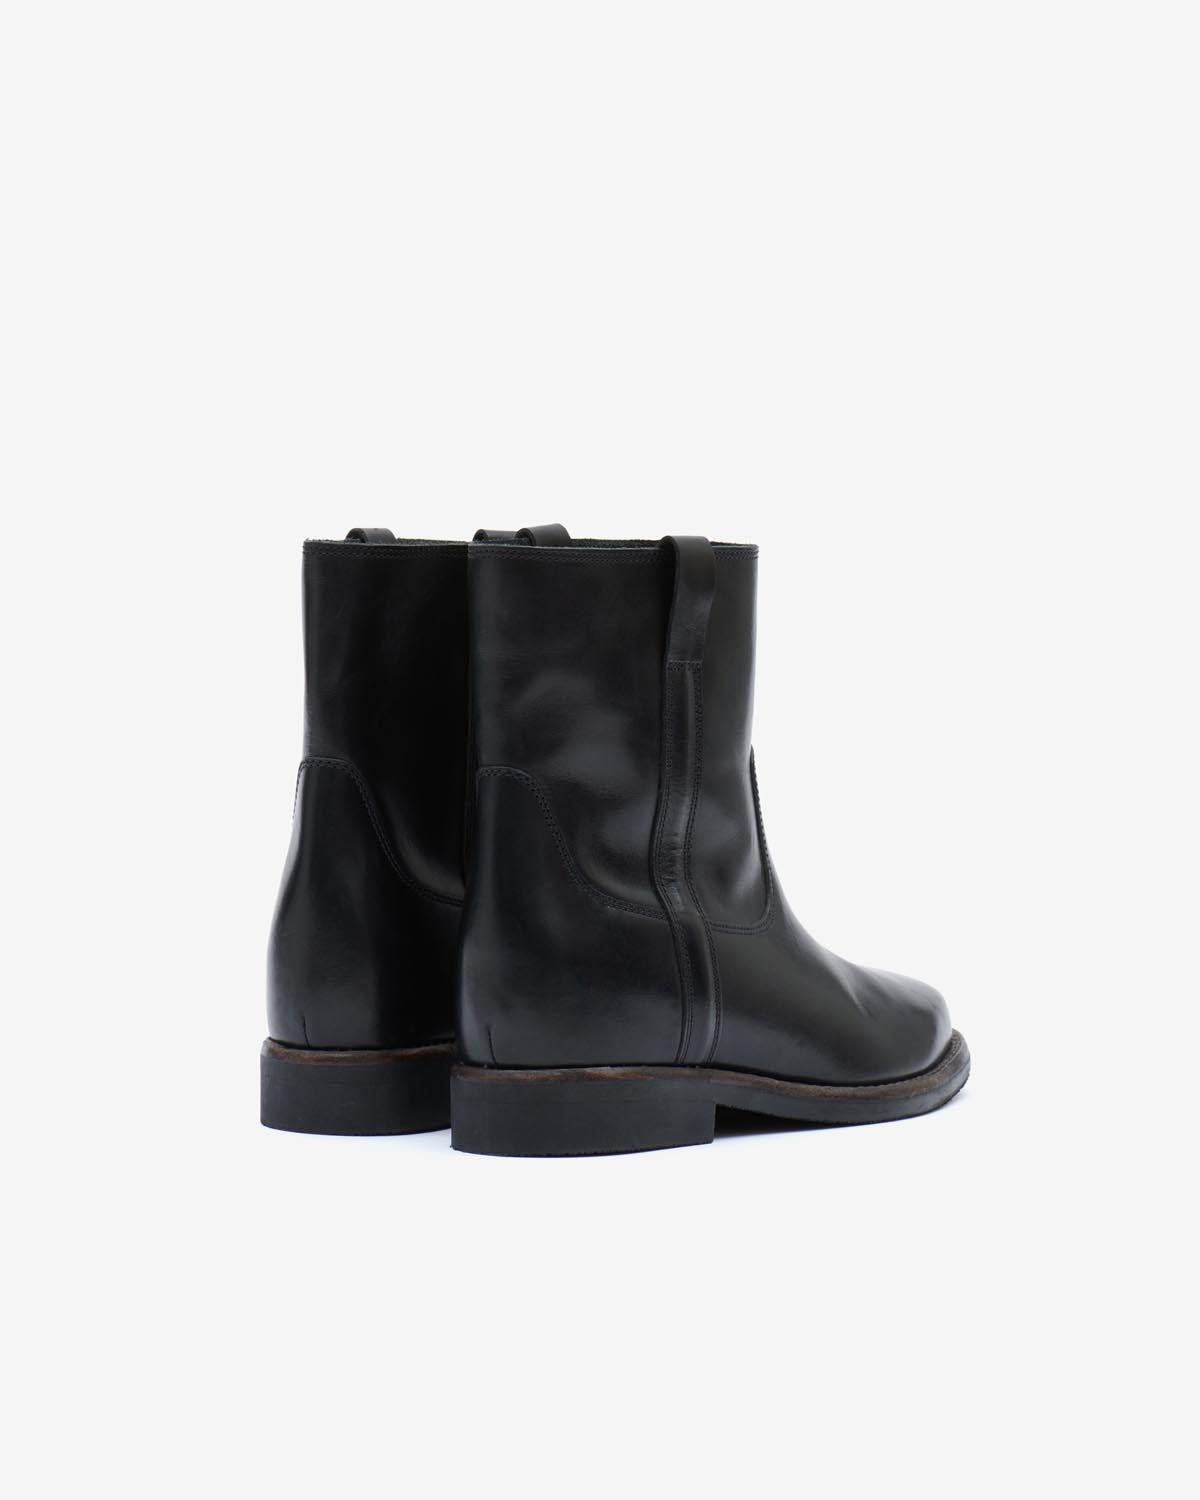 Boots susee Woman Noir 8